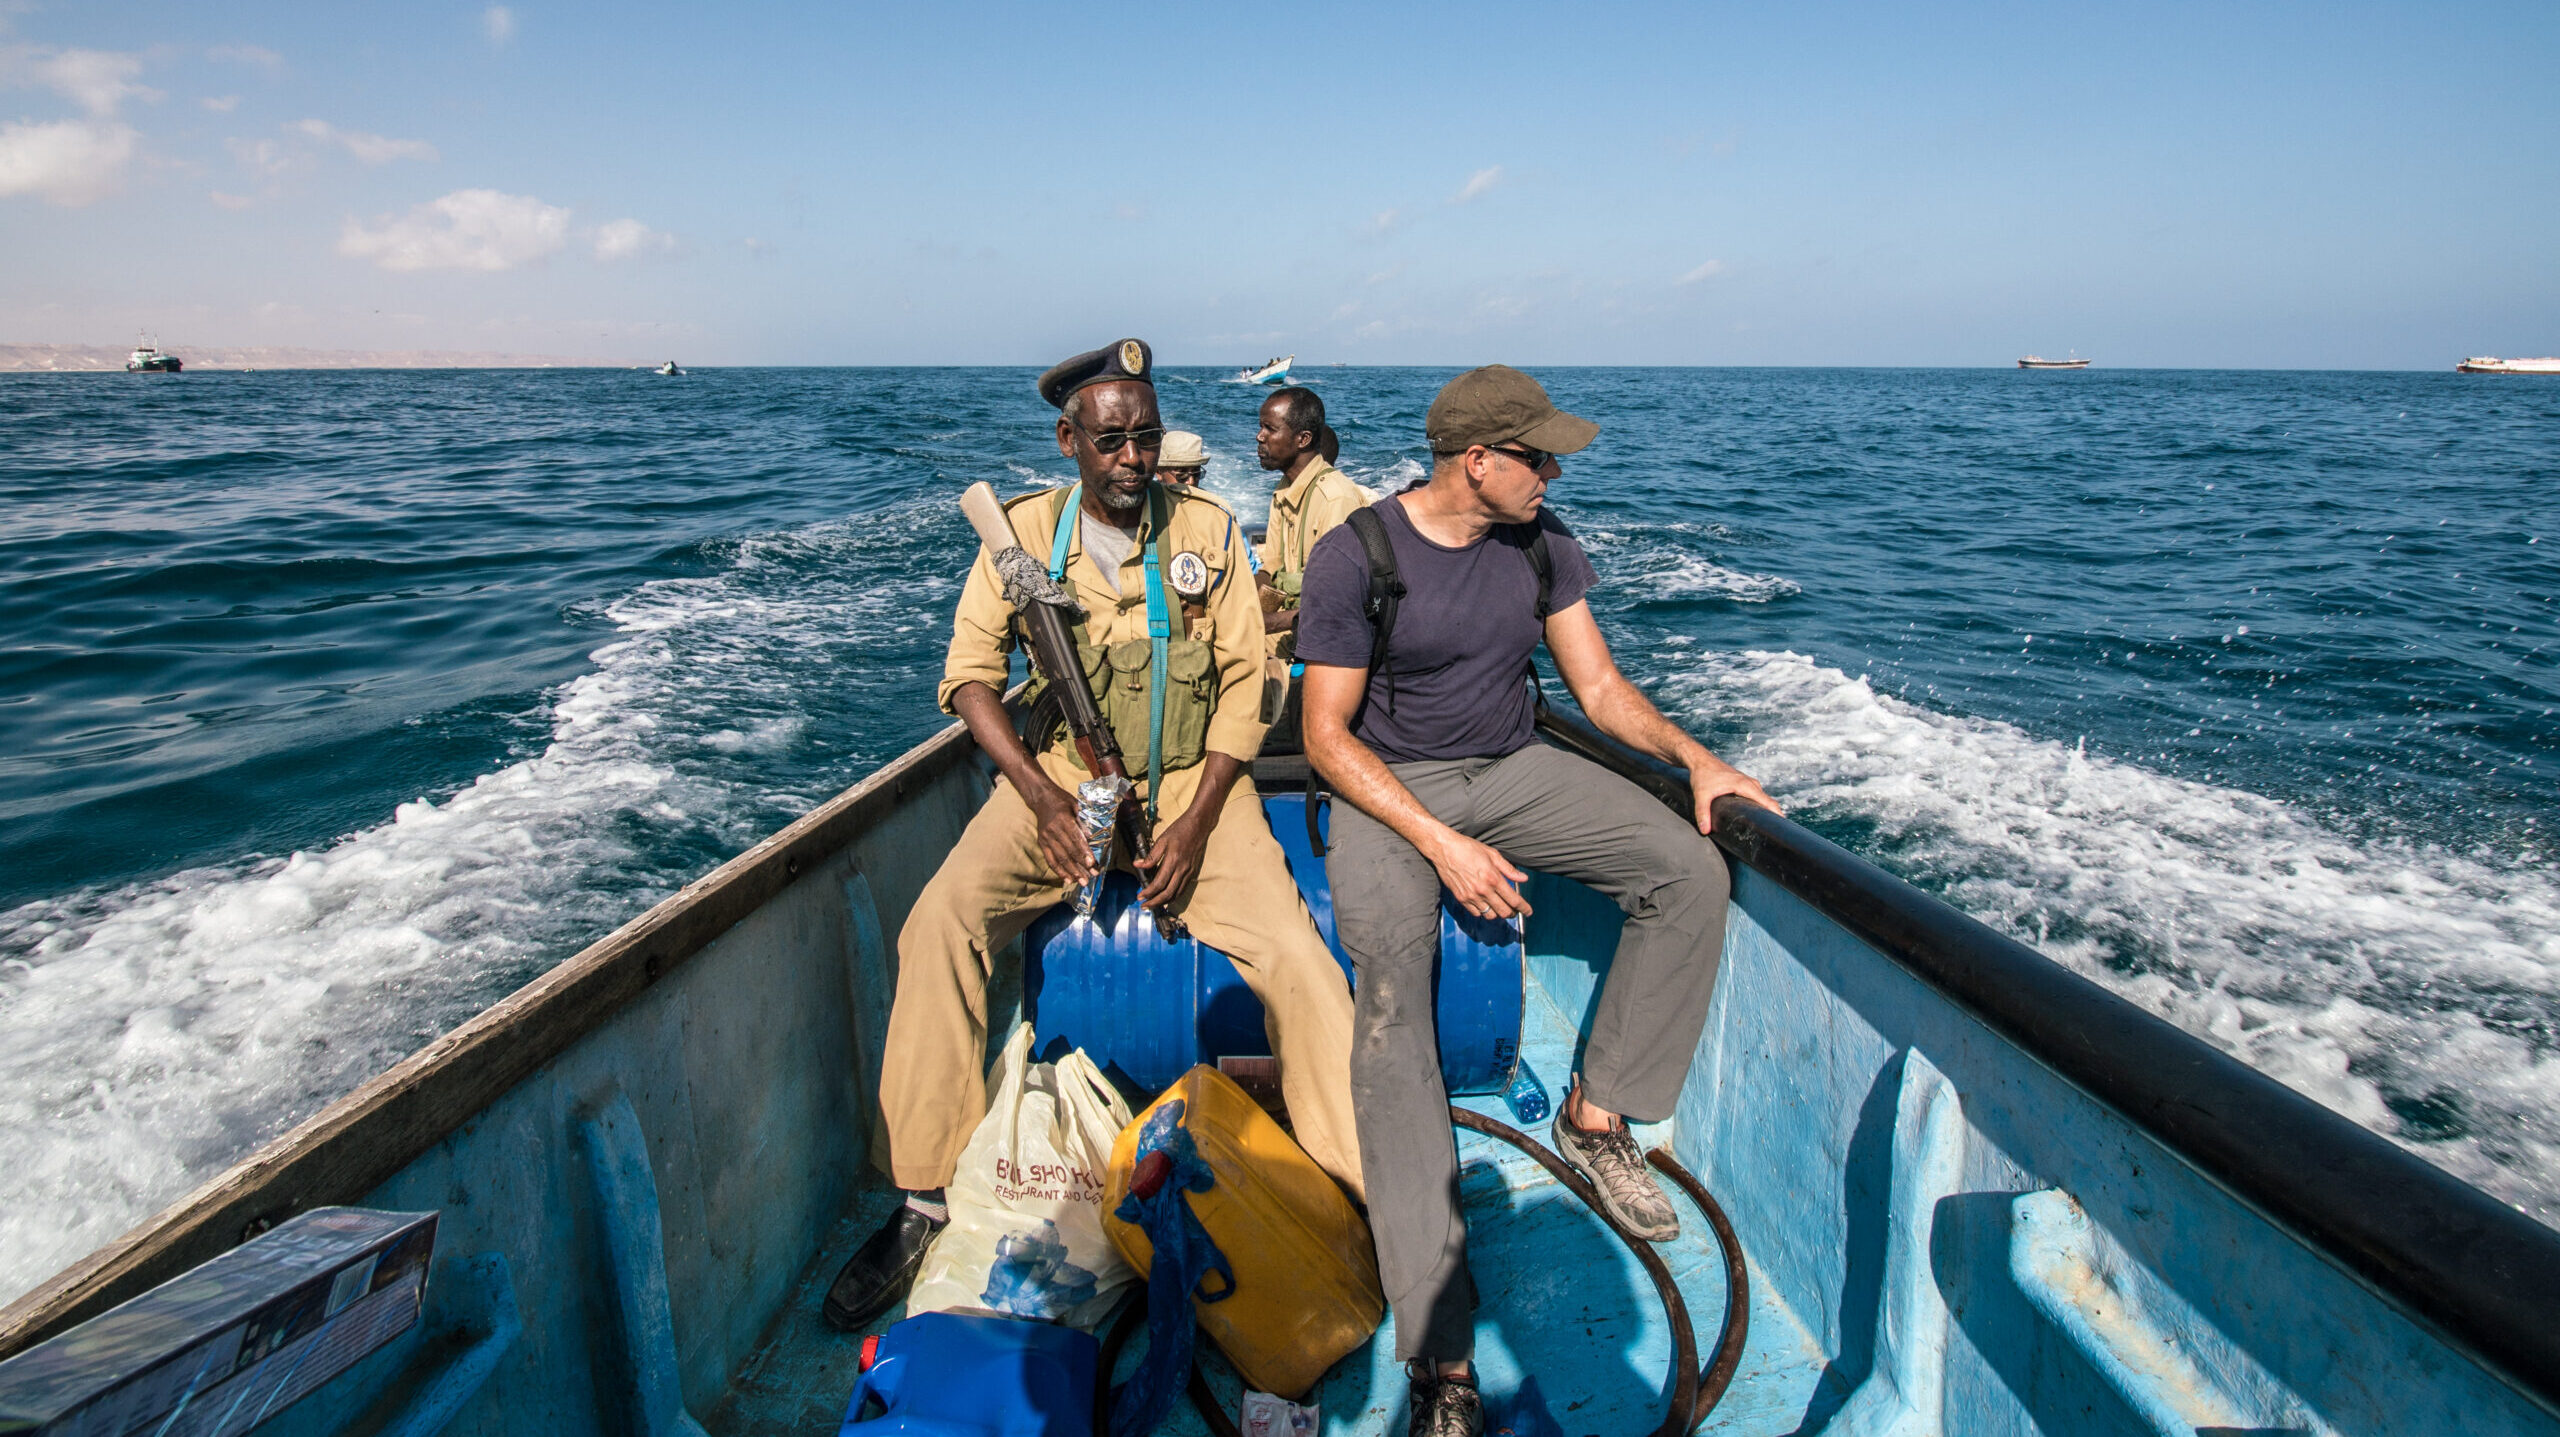 Award-winning reporter Ian Urbina (right) left the New York Times in 2019 to found The Outlaw Ocean Project. (Fabio Nascimento)